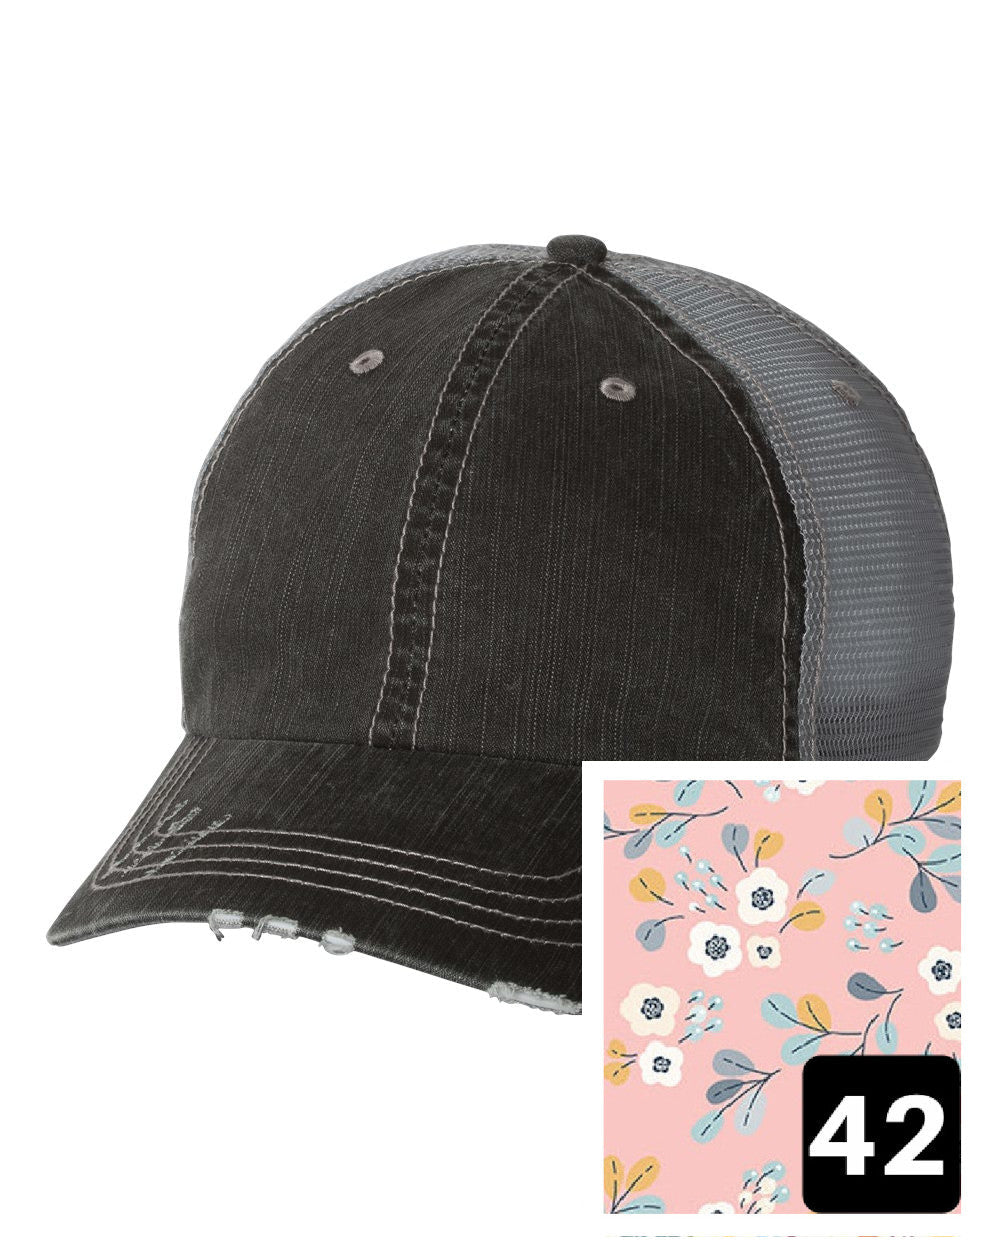 gray distressed trucker hat with light blue and pink mosaic fabric state of Texas